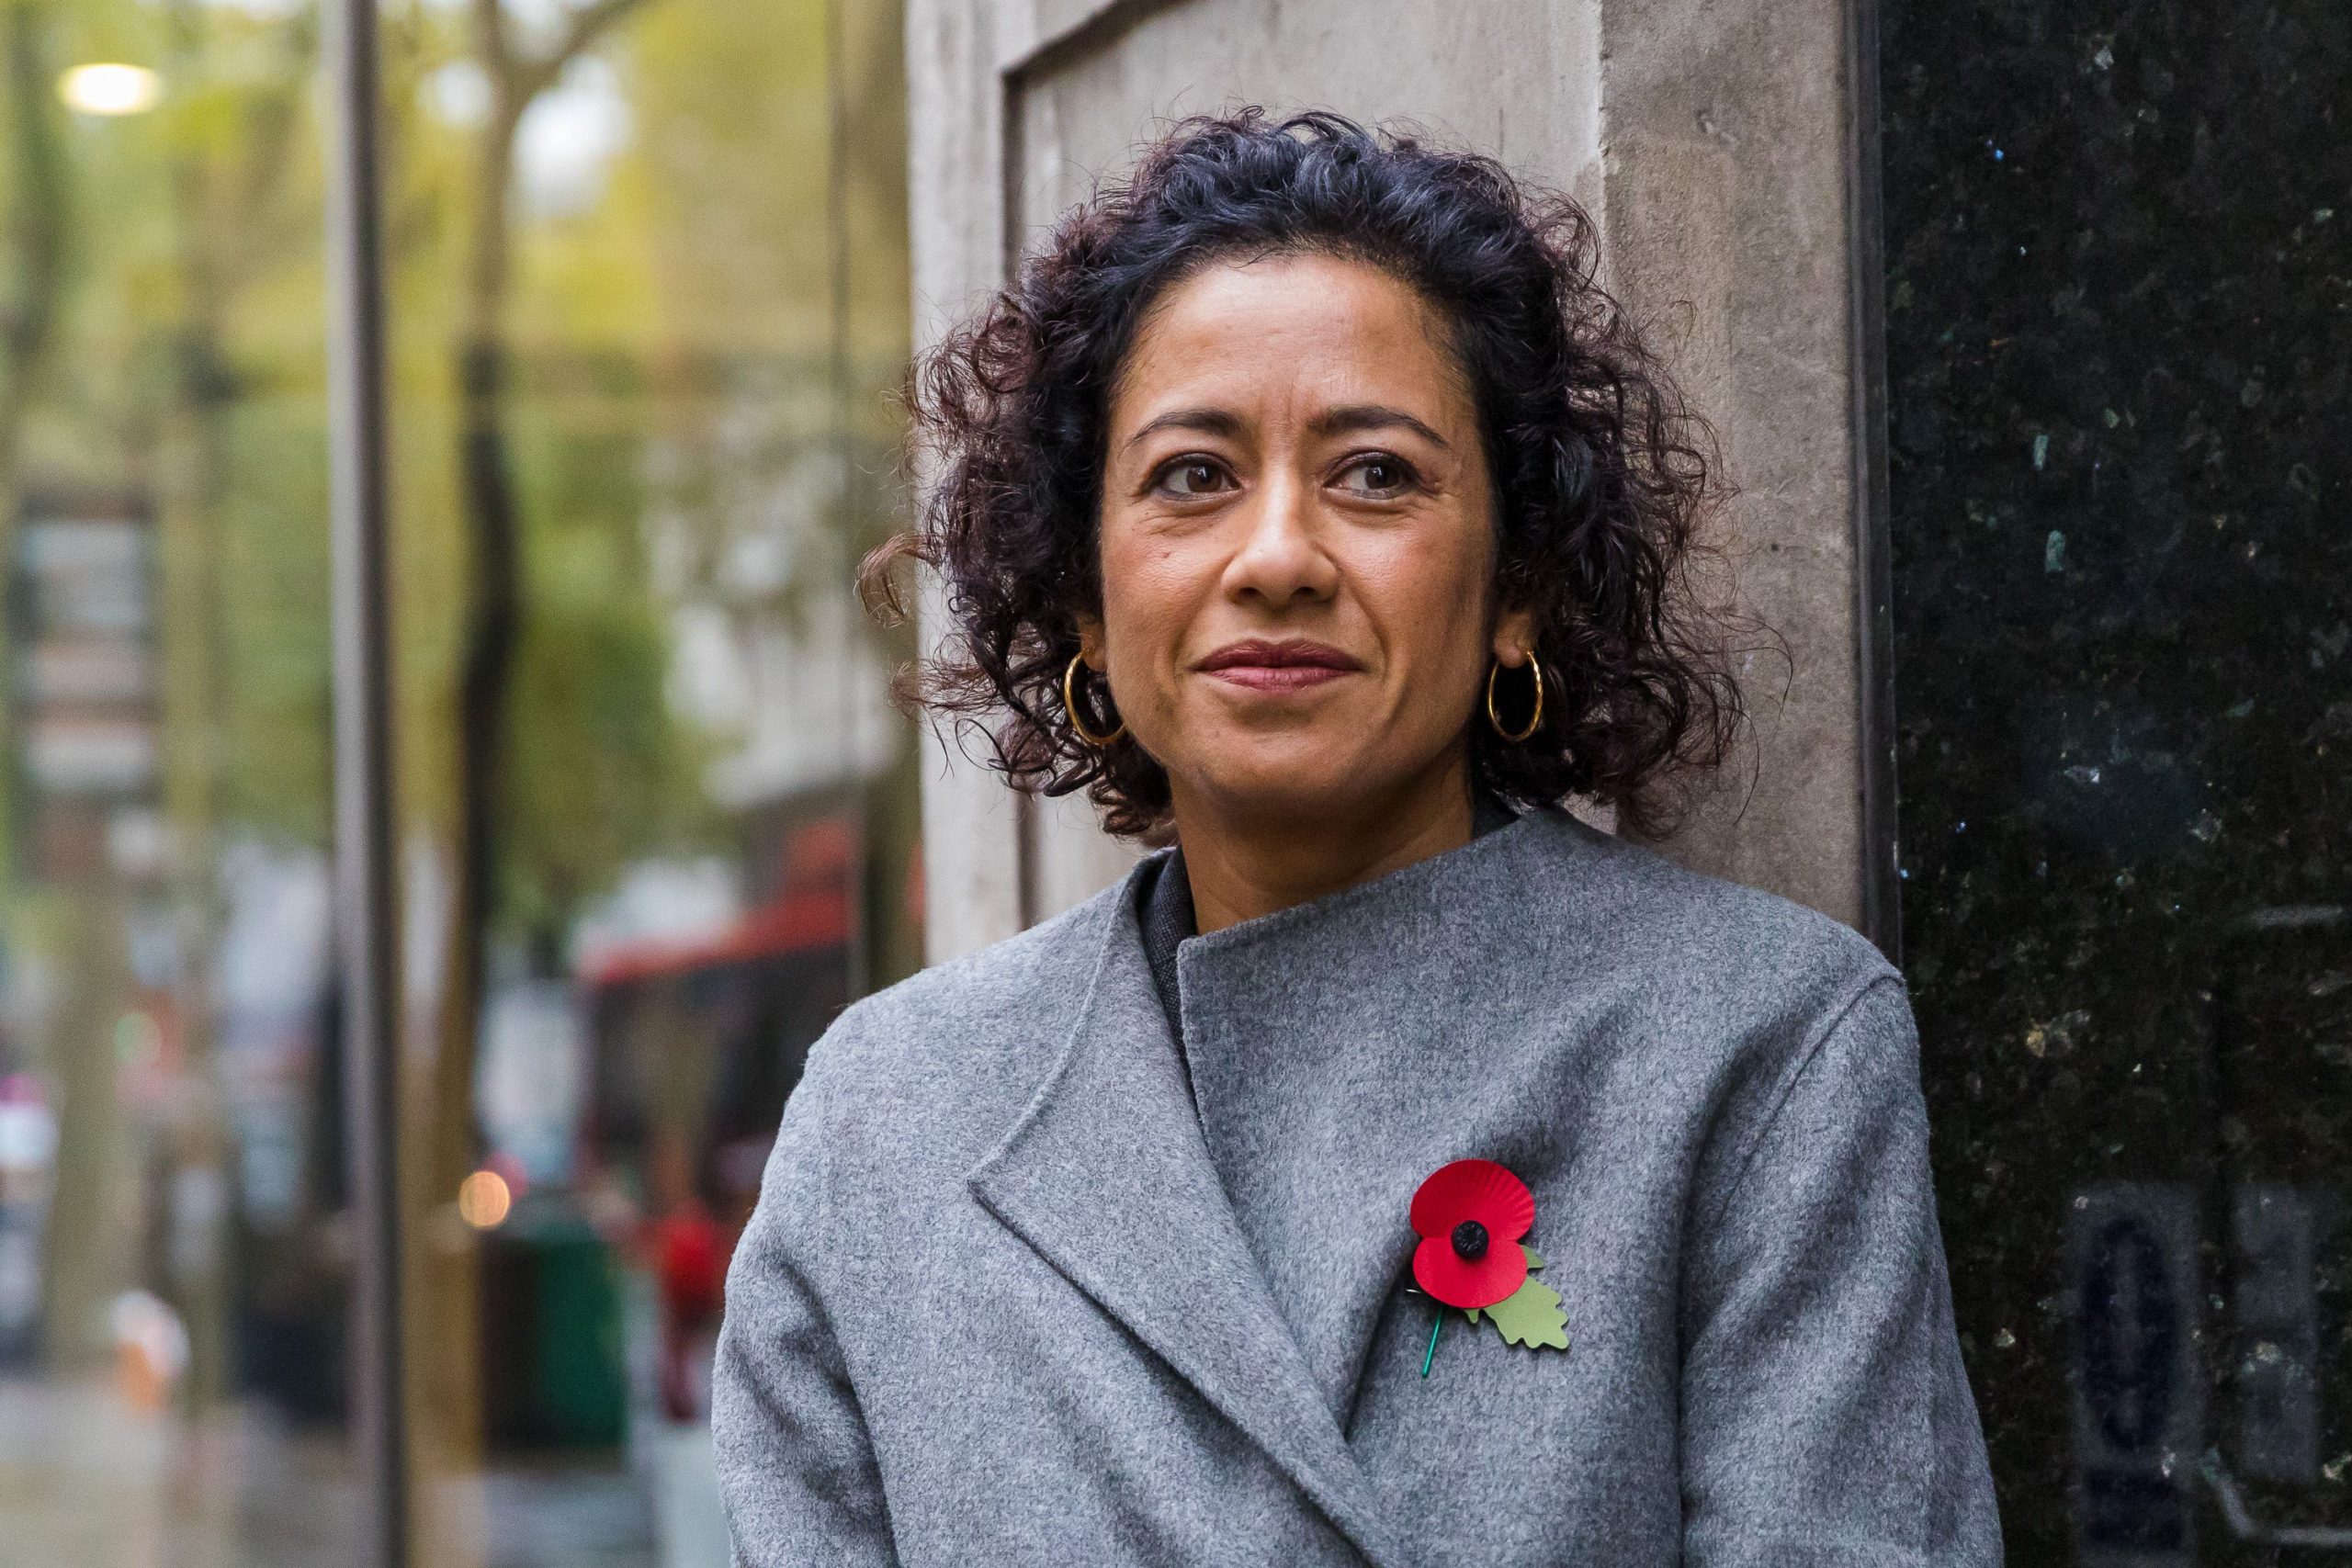 Samira Ahmed at the Central London Employment Tribunal to attend an equal pay case hearing against the BBC.